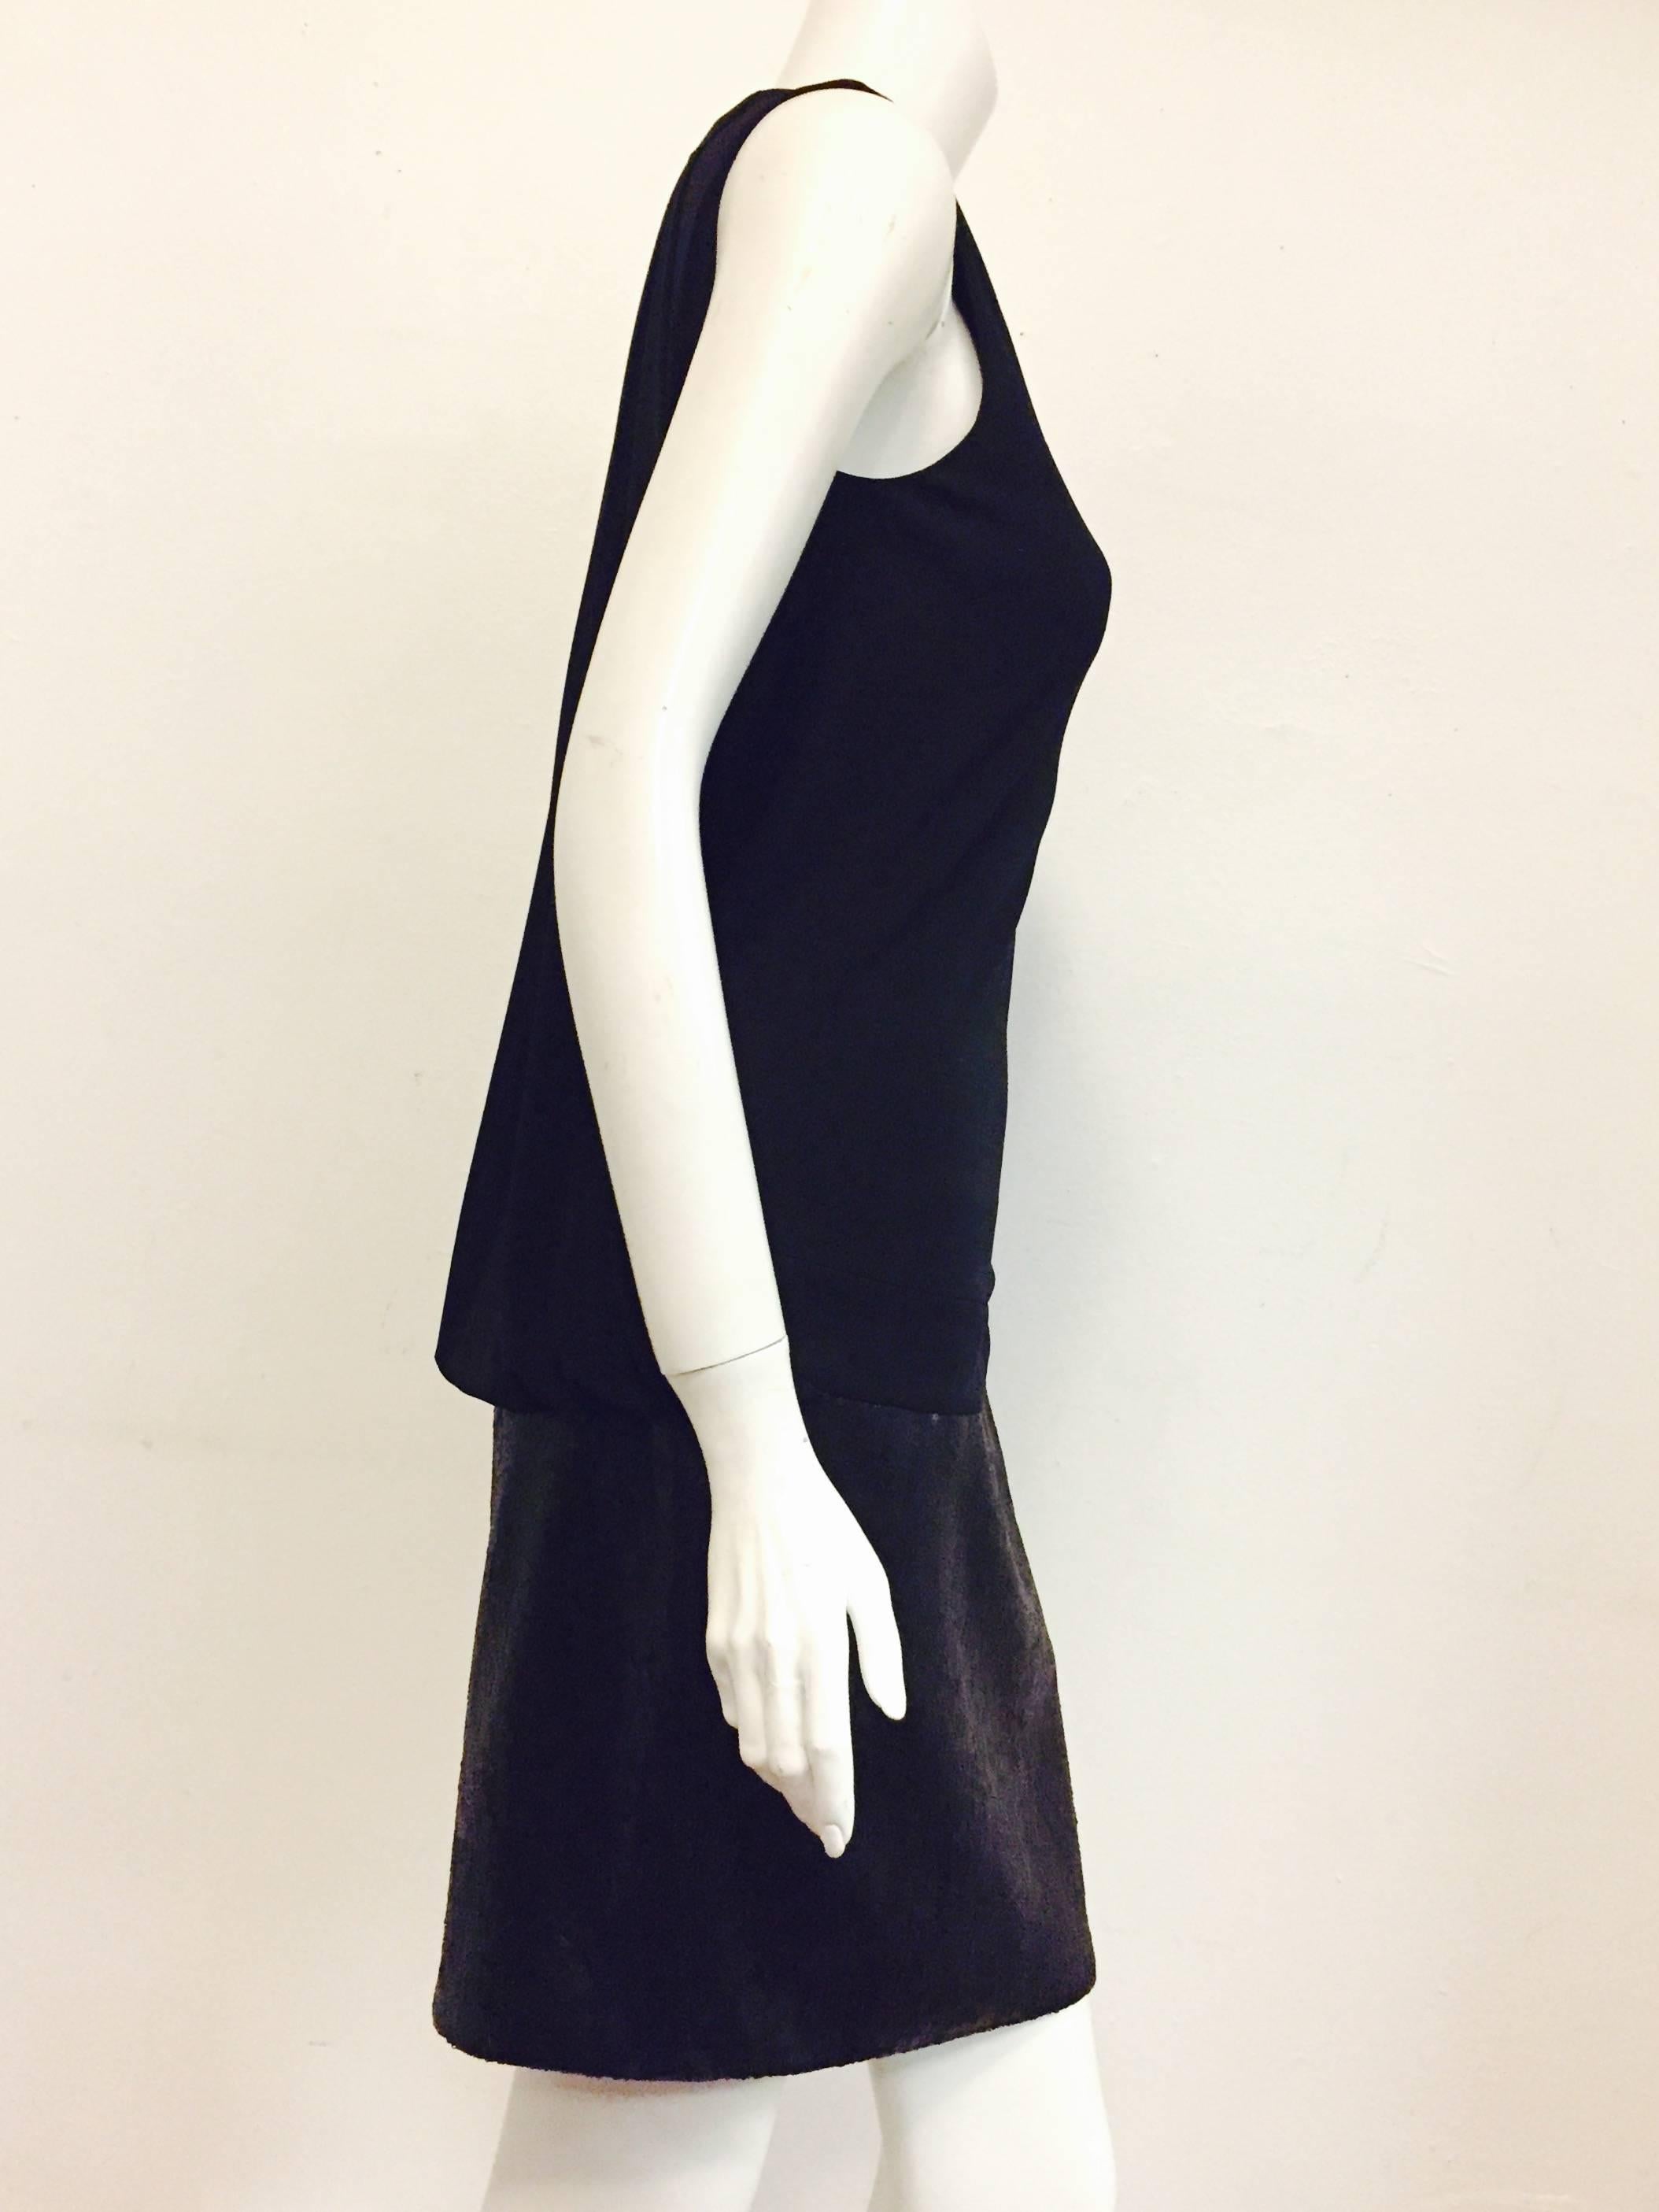 A Beguiling Baday black dress with matte sequined skirt and viscose top is sure to please all admirers!  This sleeveless dress has a dropped waist, gathered and draped back.  Tie at neck is the finishing touch!  Easy to wear and perfect for